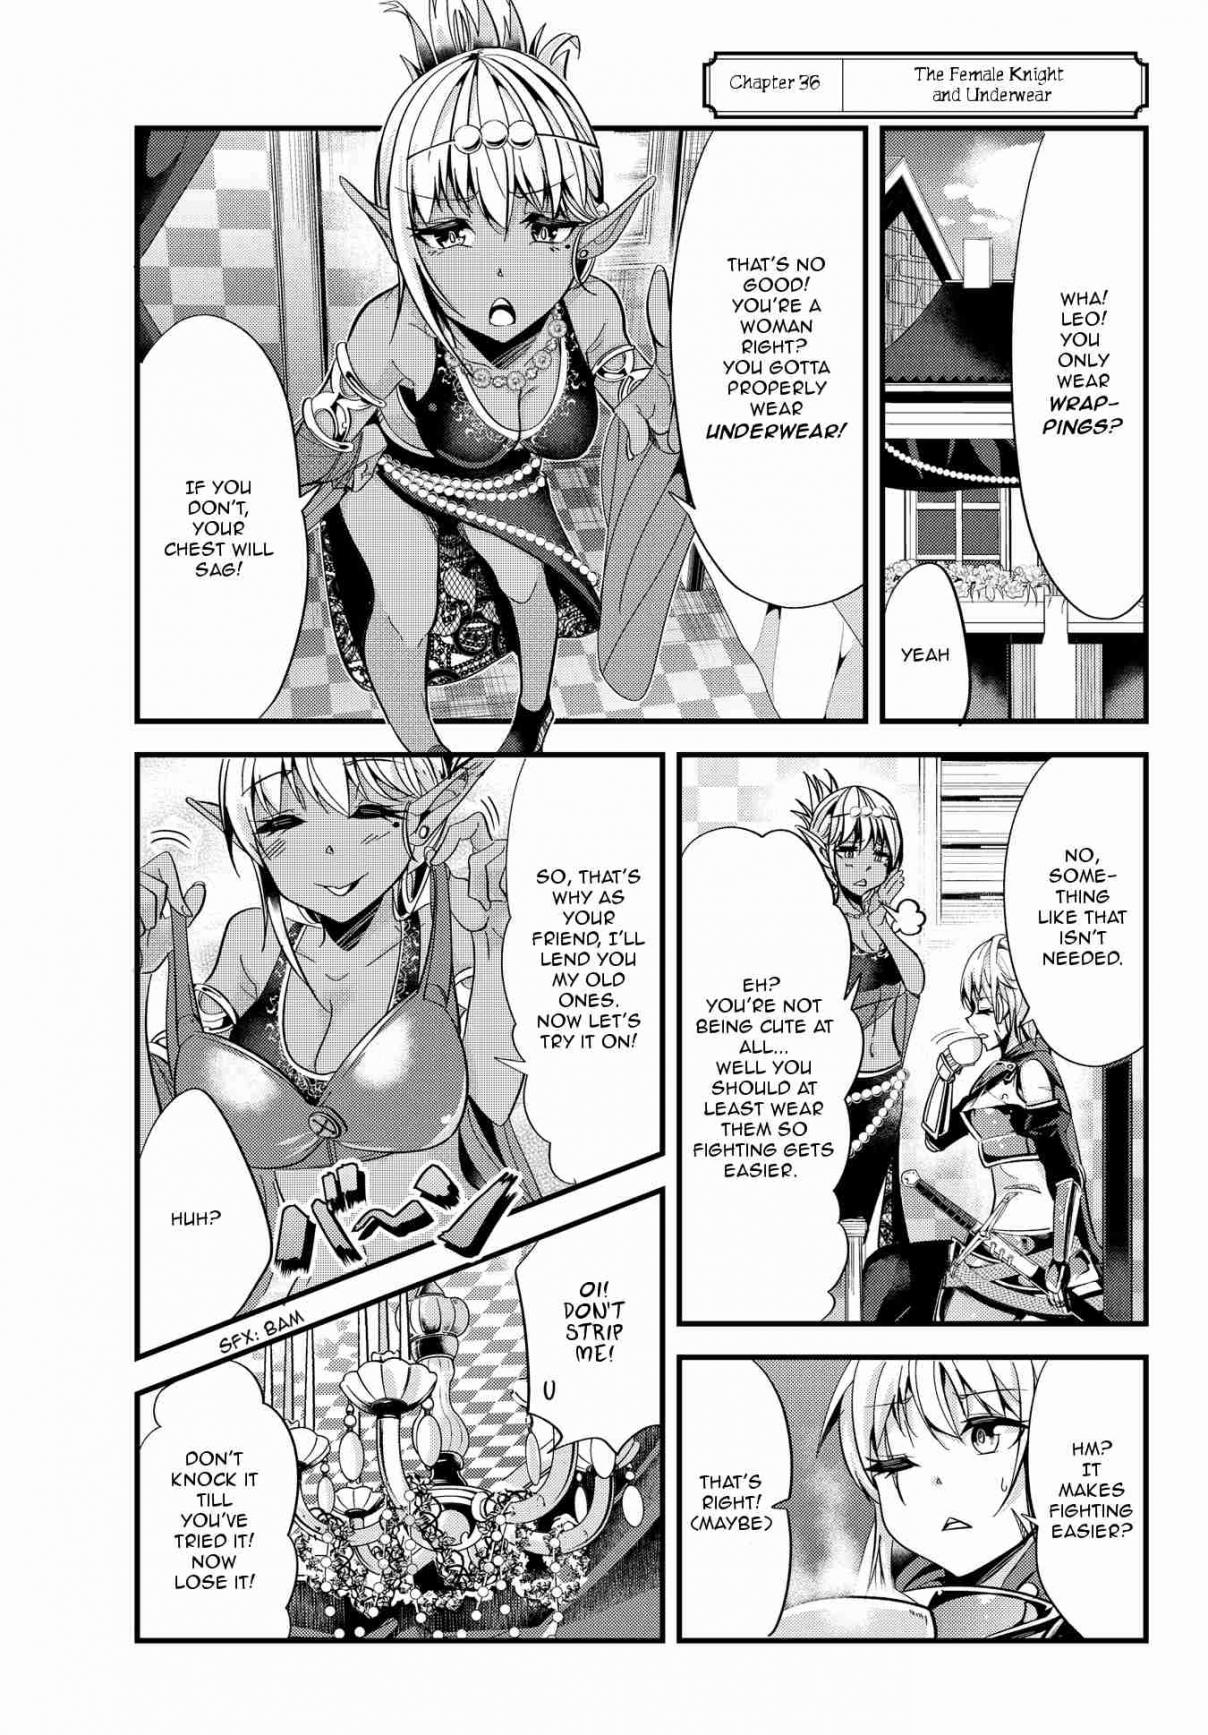 A Story About Treating a Female Knight, Who Has Never Been Treated as a Woman, as a Woman Ch. 36 The Female Knight and Underwear